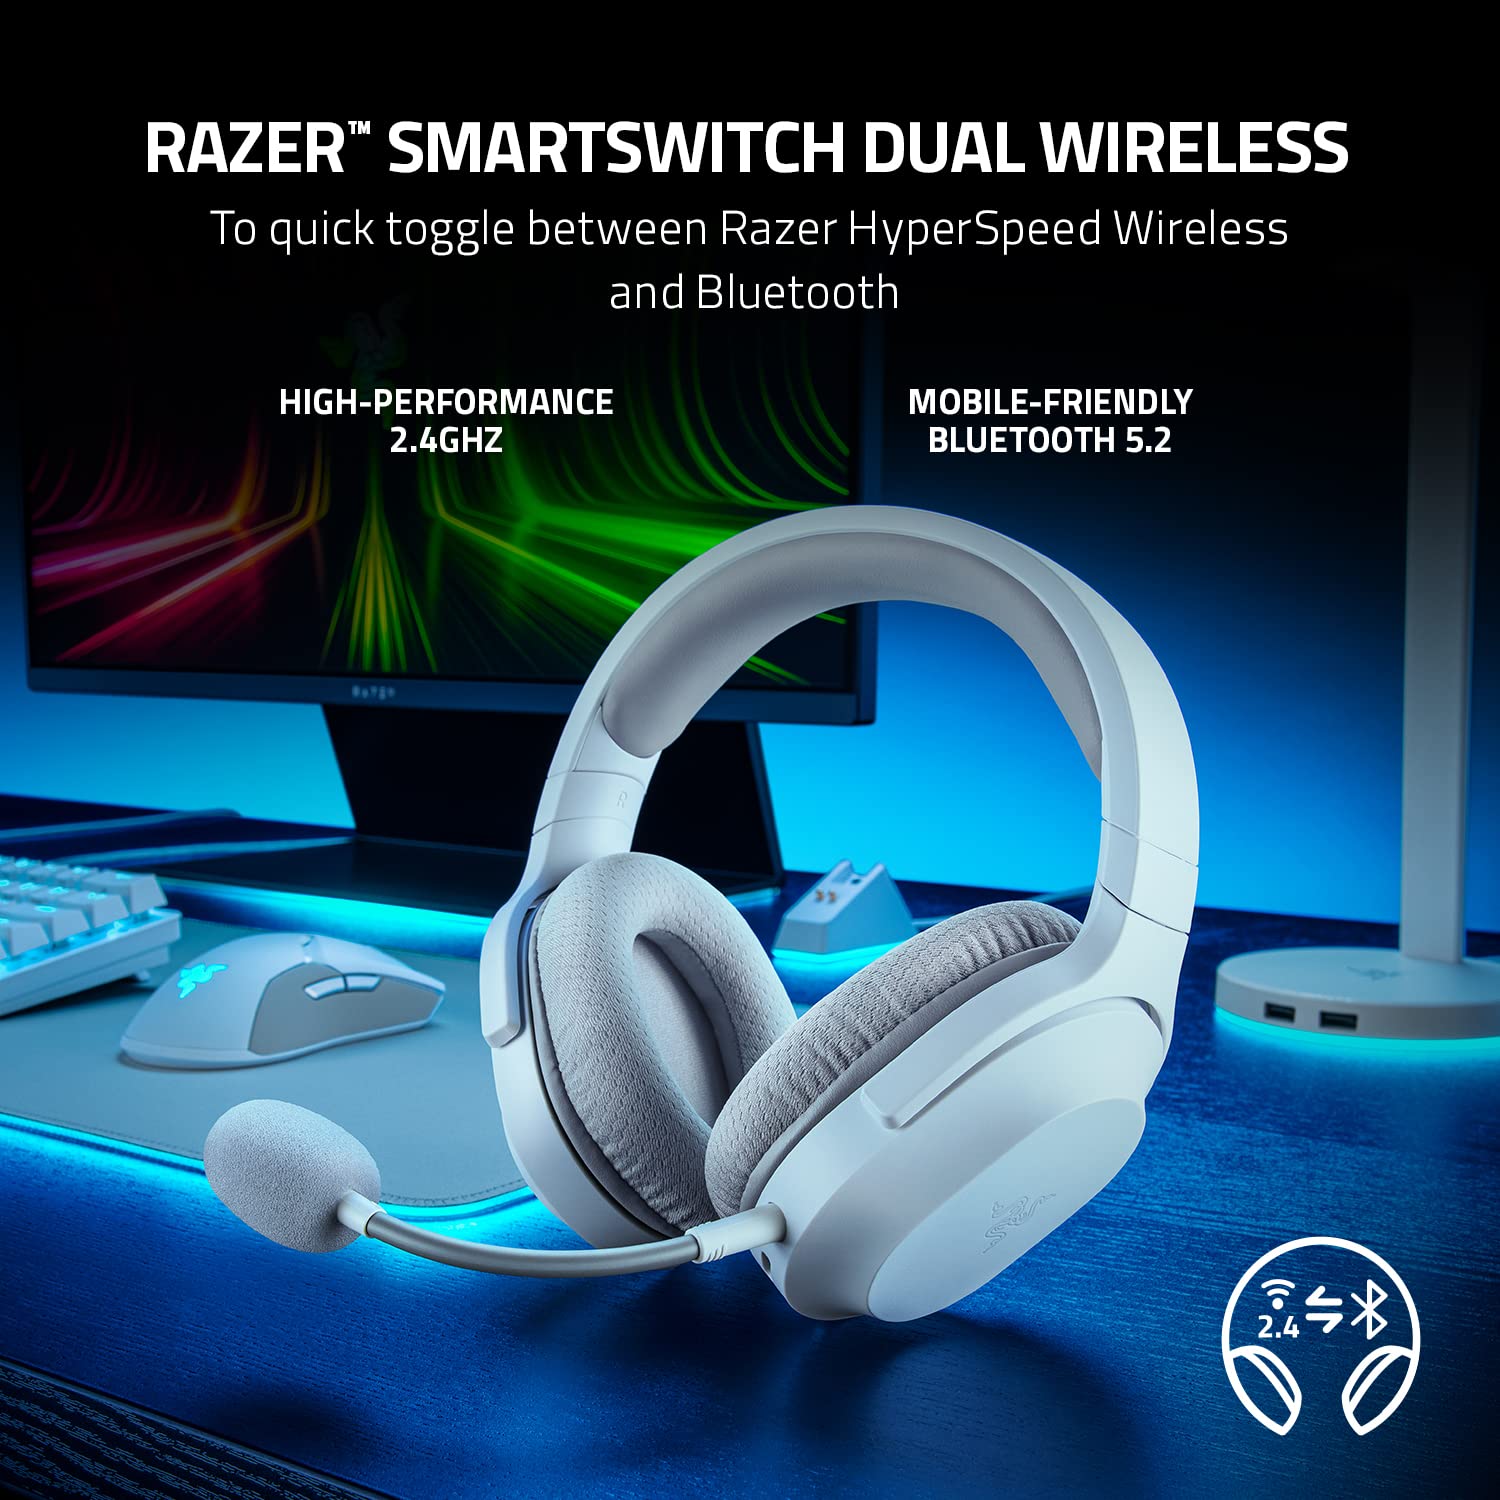 Razer Barracuda X Wireless Gaming & Mobile Headset (PC, Playstation, Switch, Android, iOS): 2022 Model - 2.4GHz Wireless + Bluetooth - Lightweight 250g - 40mm Drivers - 50 Hr Battery - Mercury White